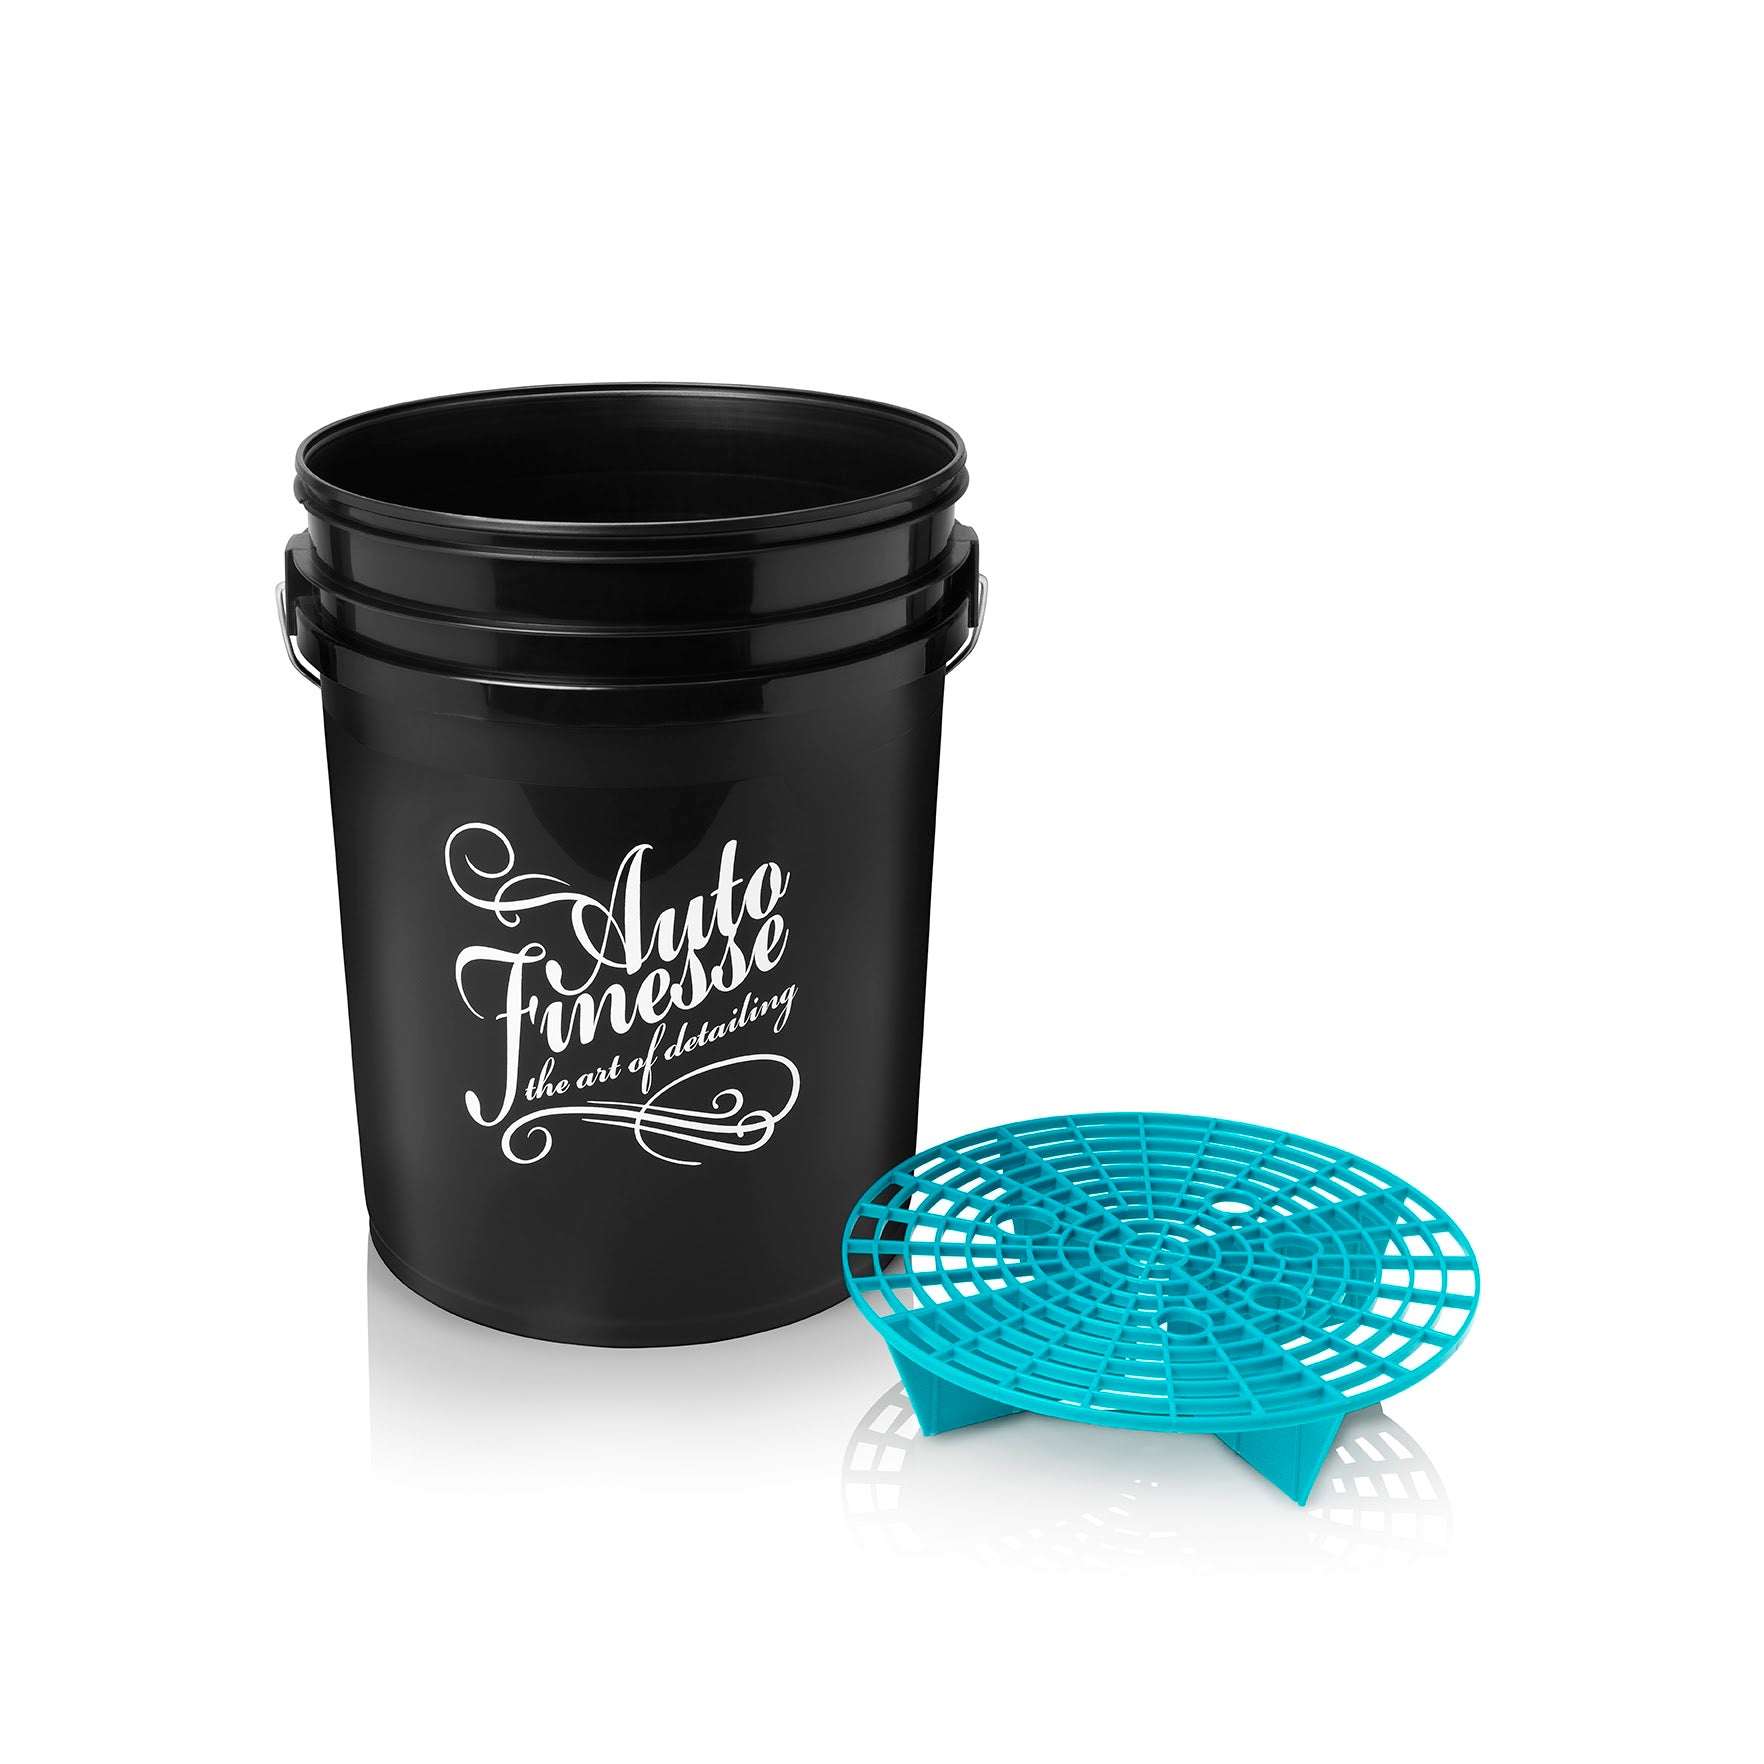 Auto Finesse Detailing Bucket with Grit Guard